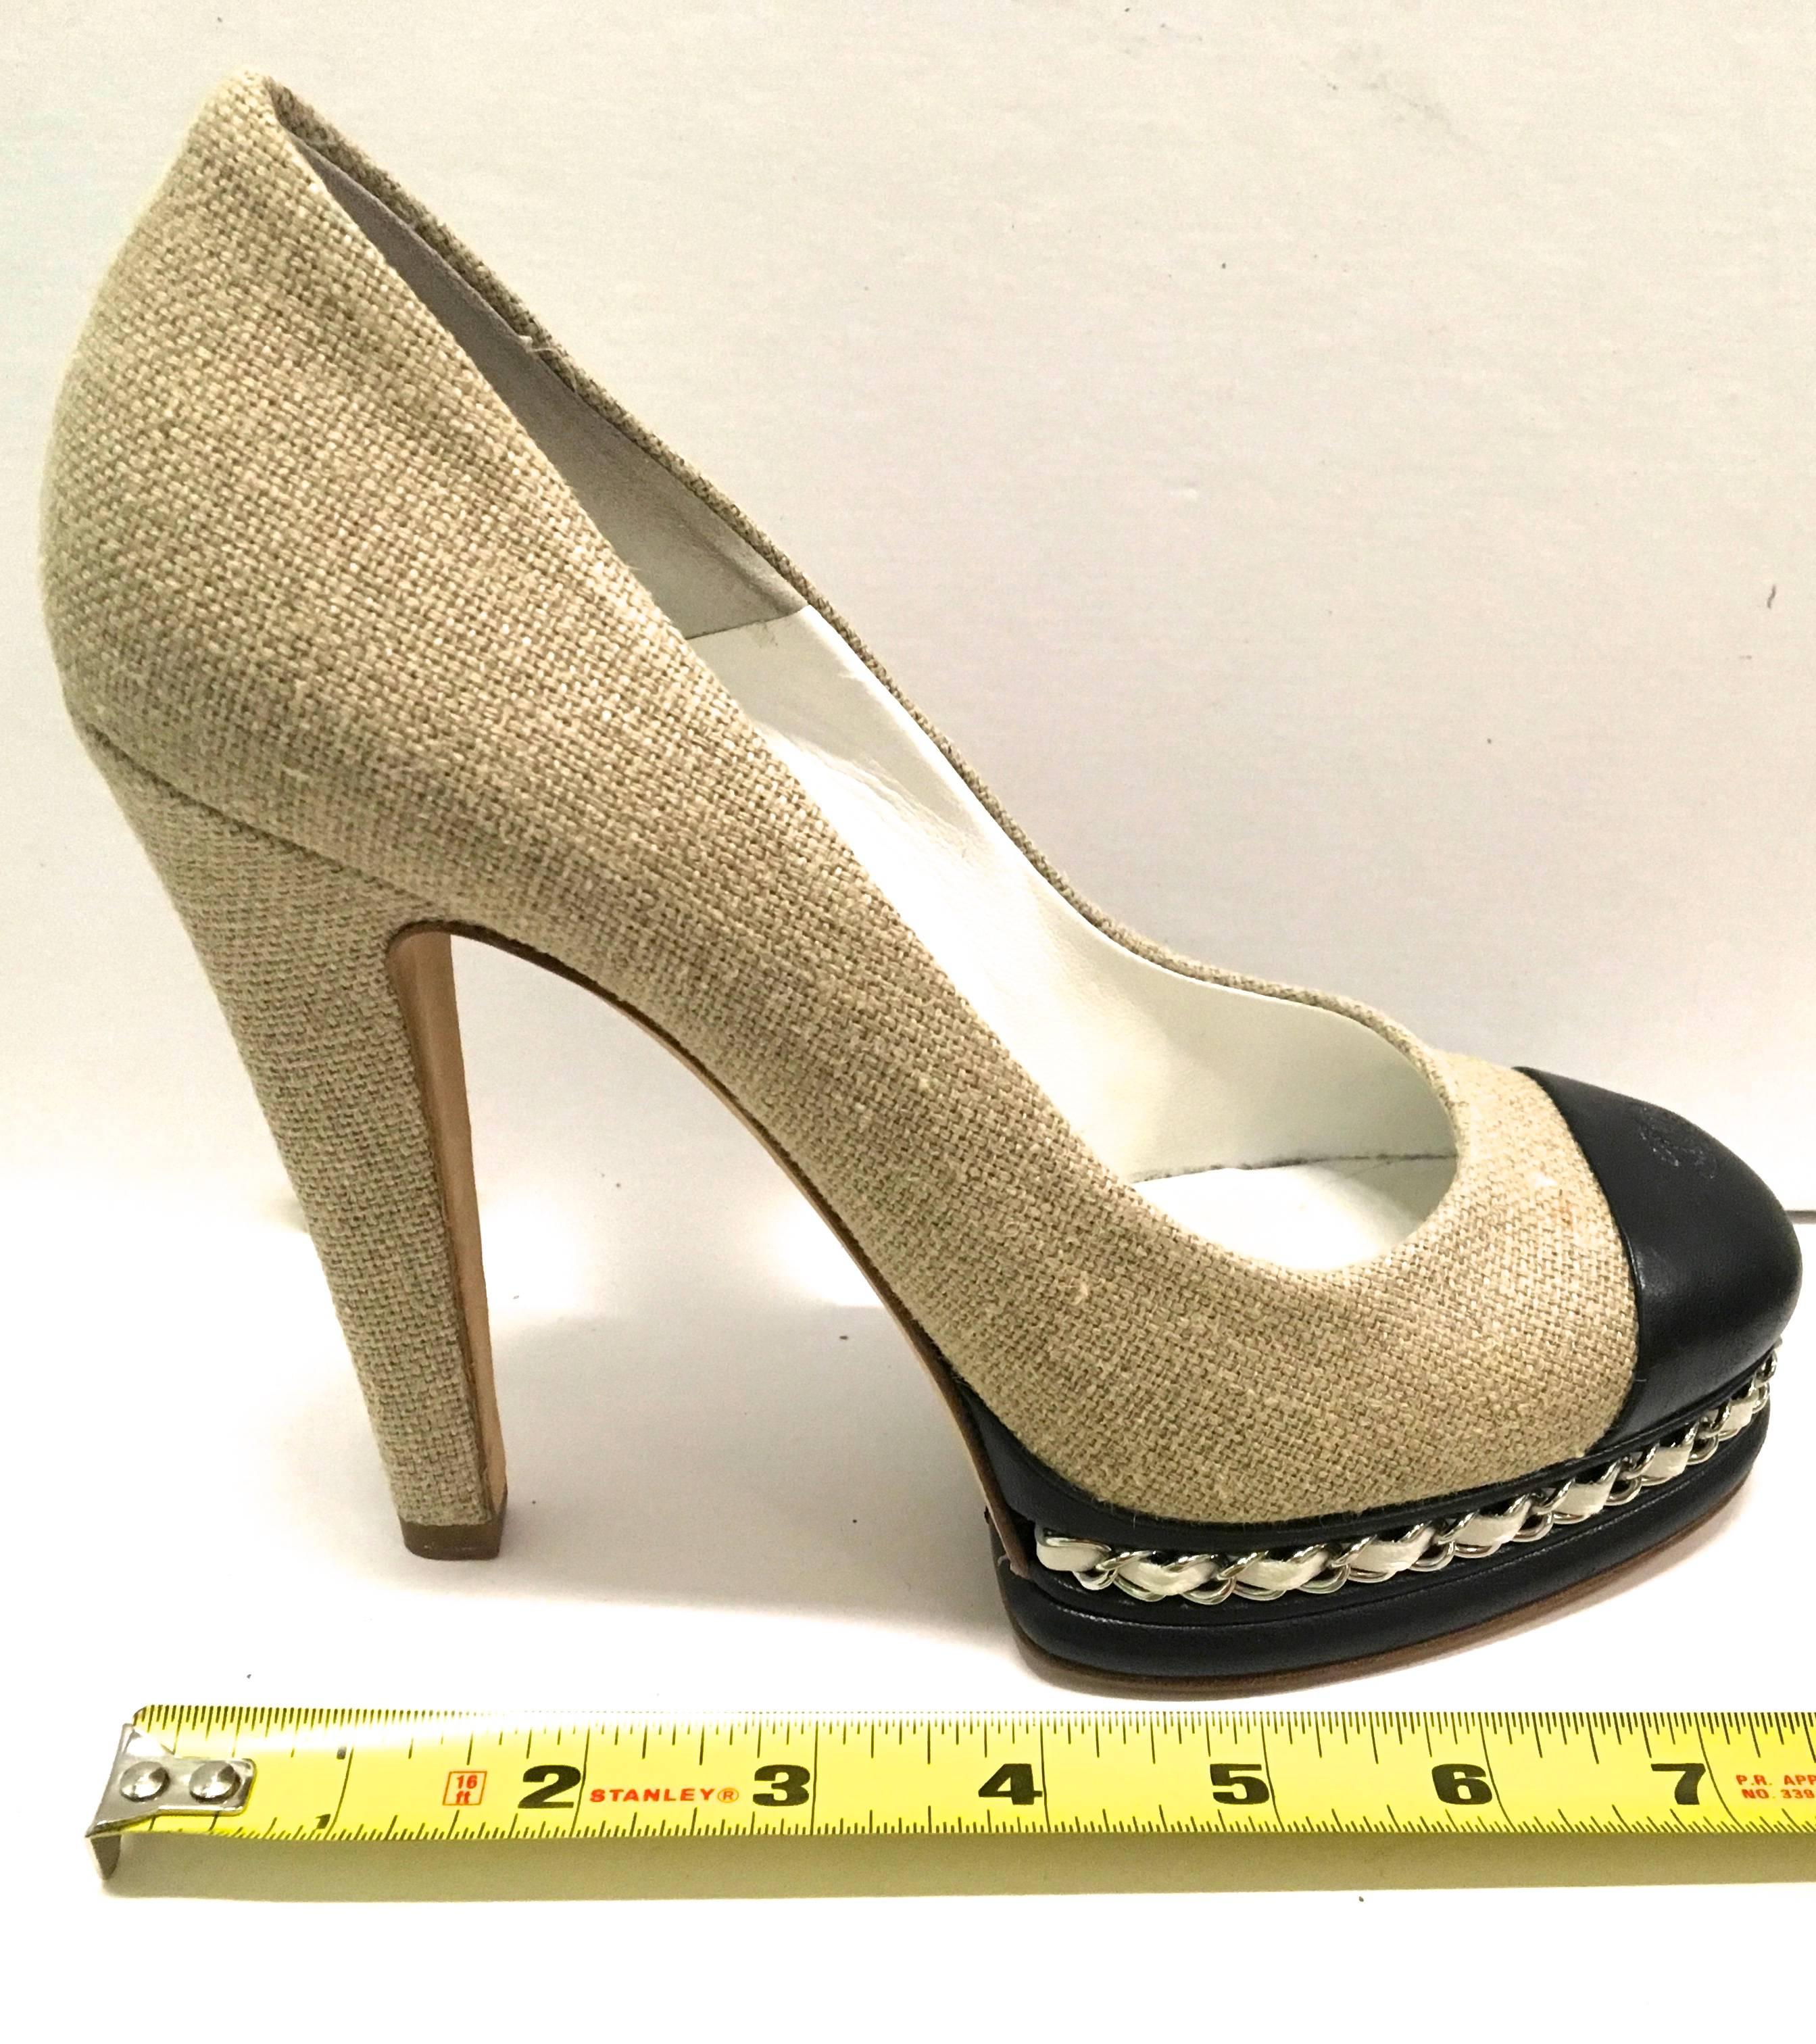 New Chanel Shoes - 8.5 - Platform Heels - Pump w/ Iconic Chain For Sale 3